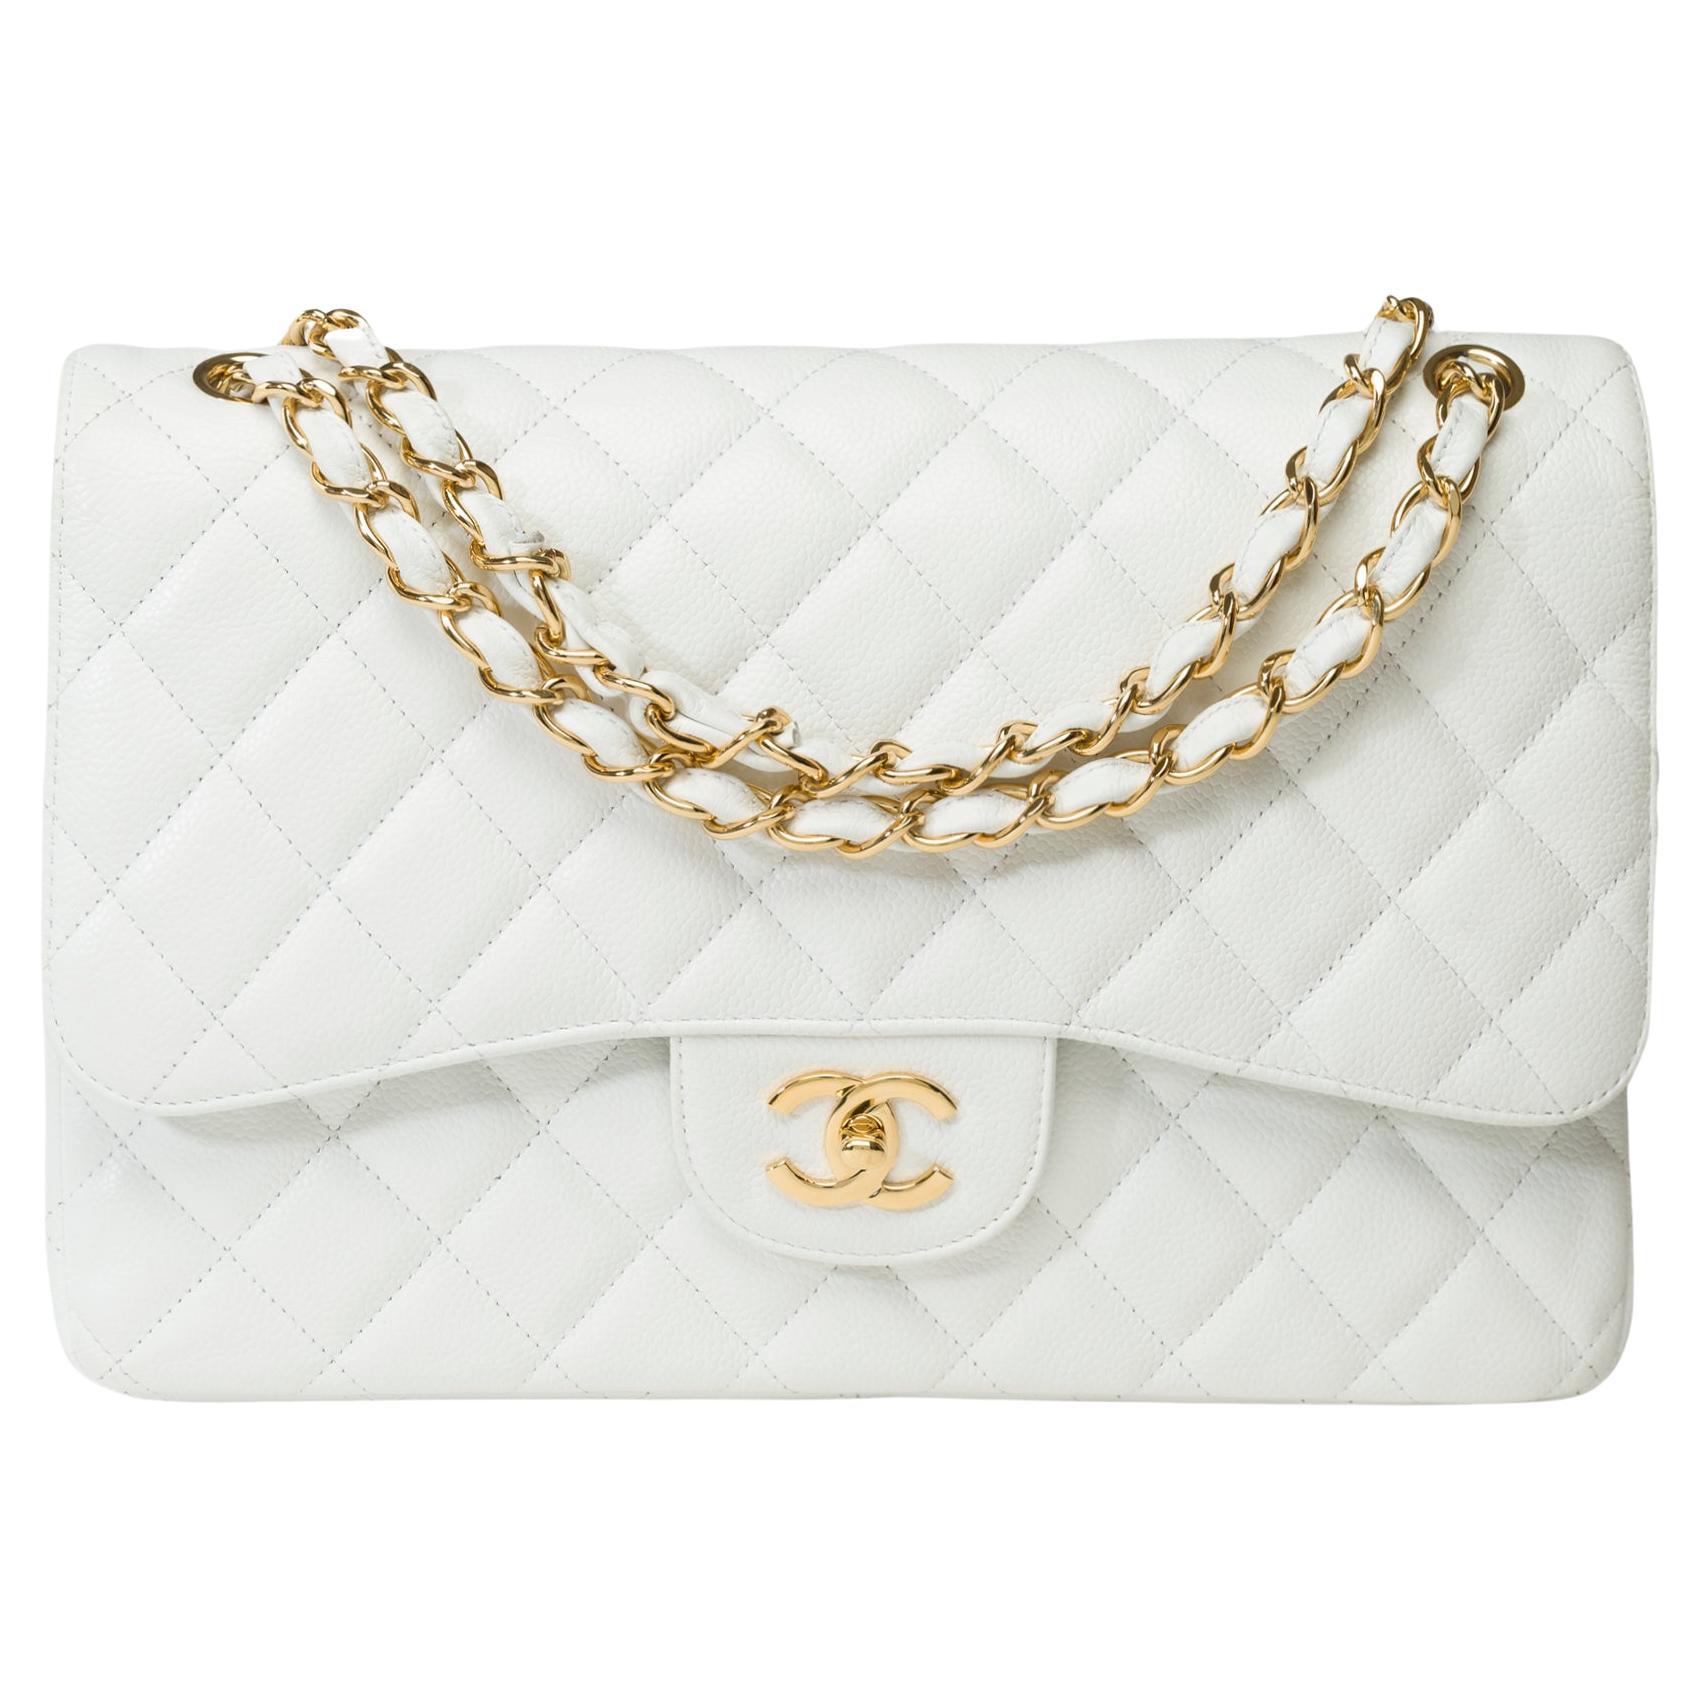 Chanel Timeless Jumbo double flap bag in White quilted Caviar leather, GHW For Sale